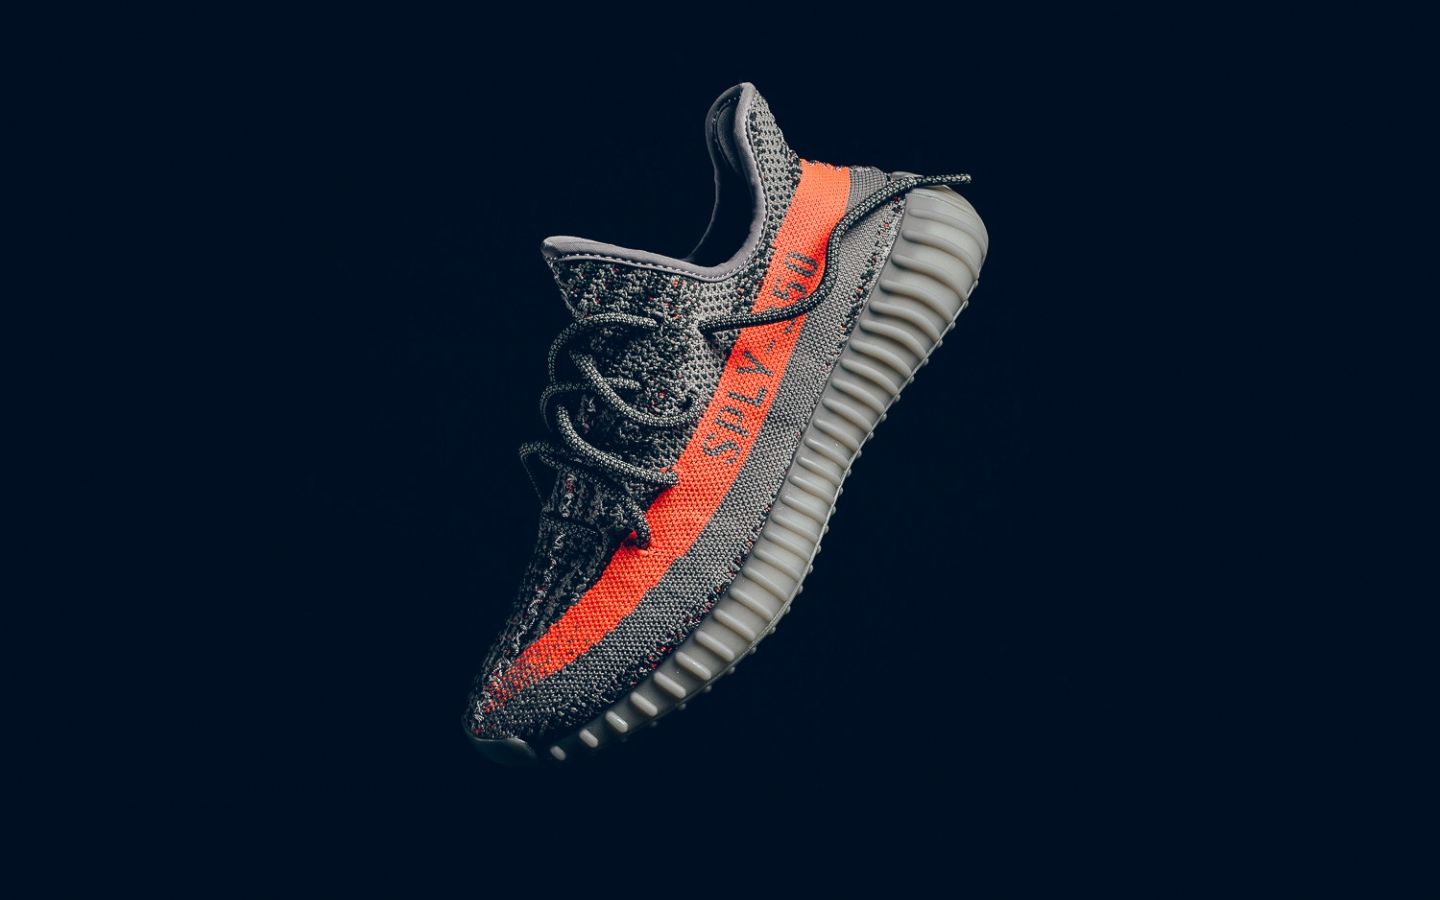 Free download adidas yeezy boost 350 v2 wallpaper [1500x1001] for your Desktop, Mobile & Tablet. Explore Adidas Yeezy Boost 350 V2 Wallpaper. Adidas Yeezy Boost 350 V2 Wallpaper, Yeezy Boost Wallpaper, Adidas Yeezy Wallpaper